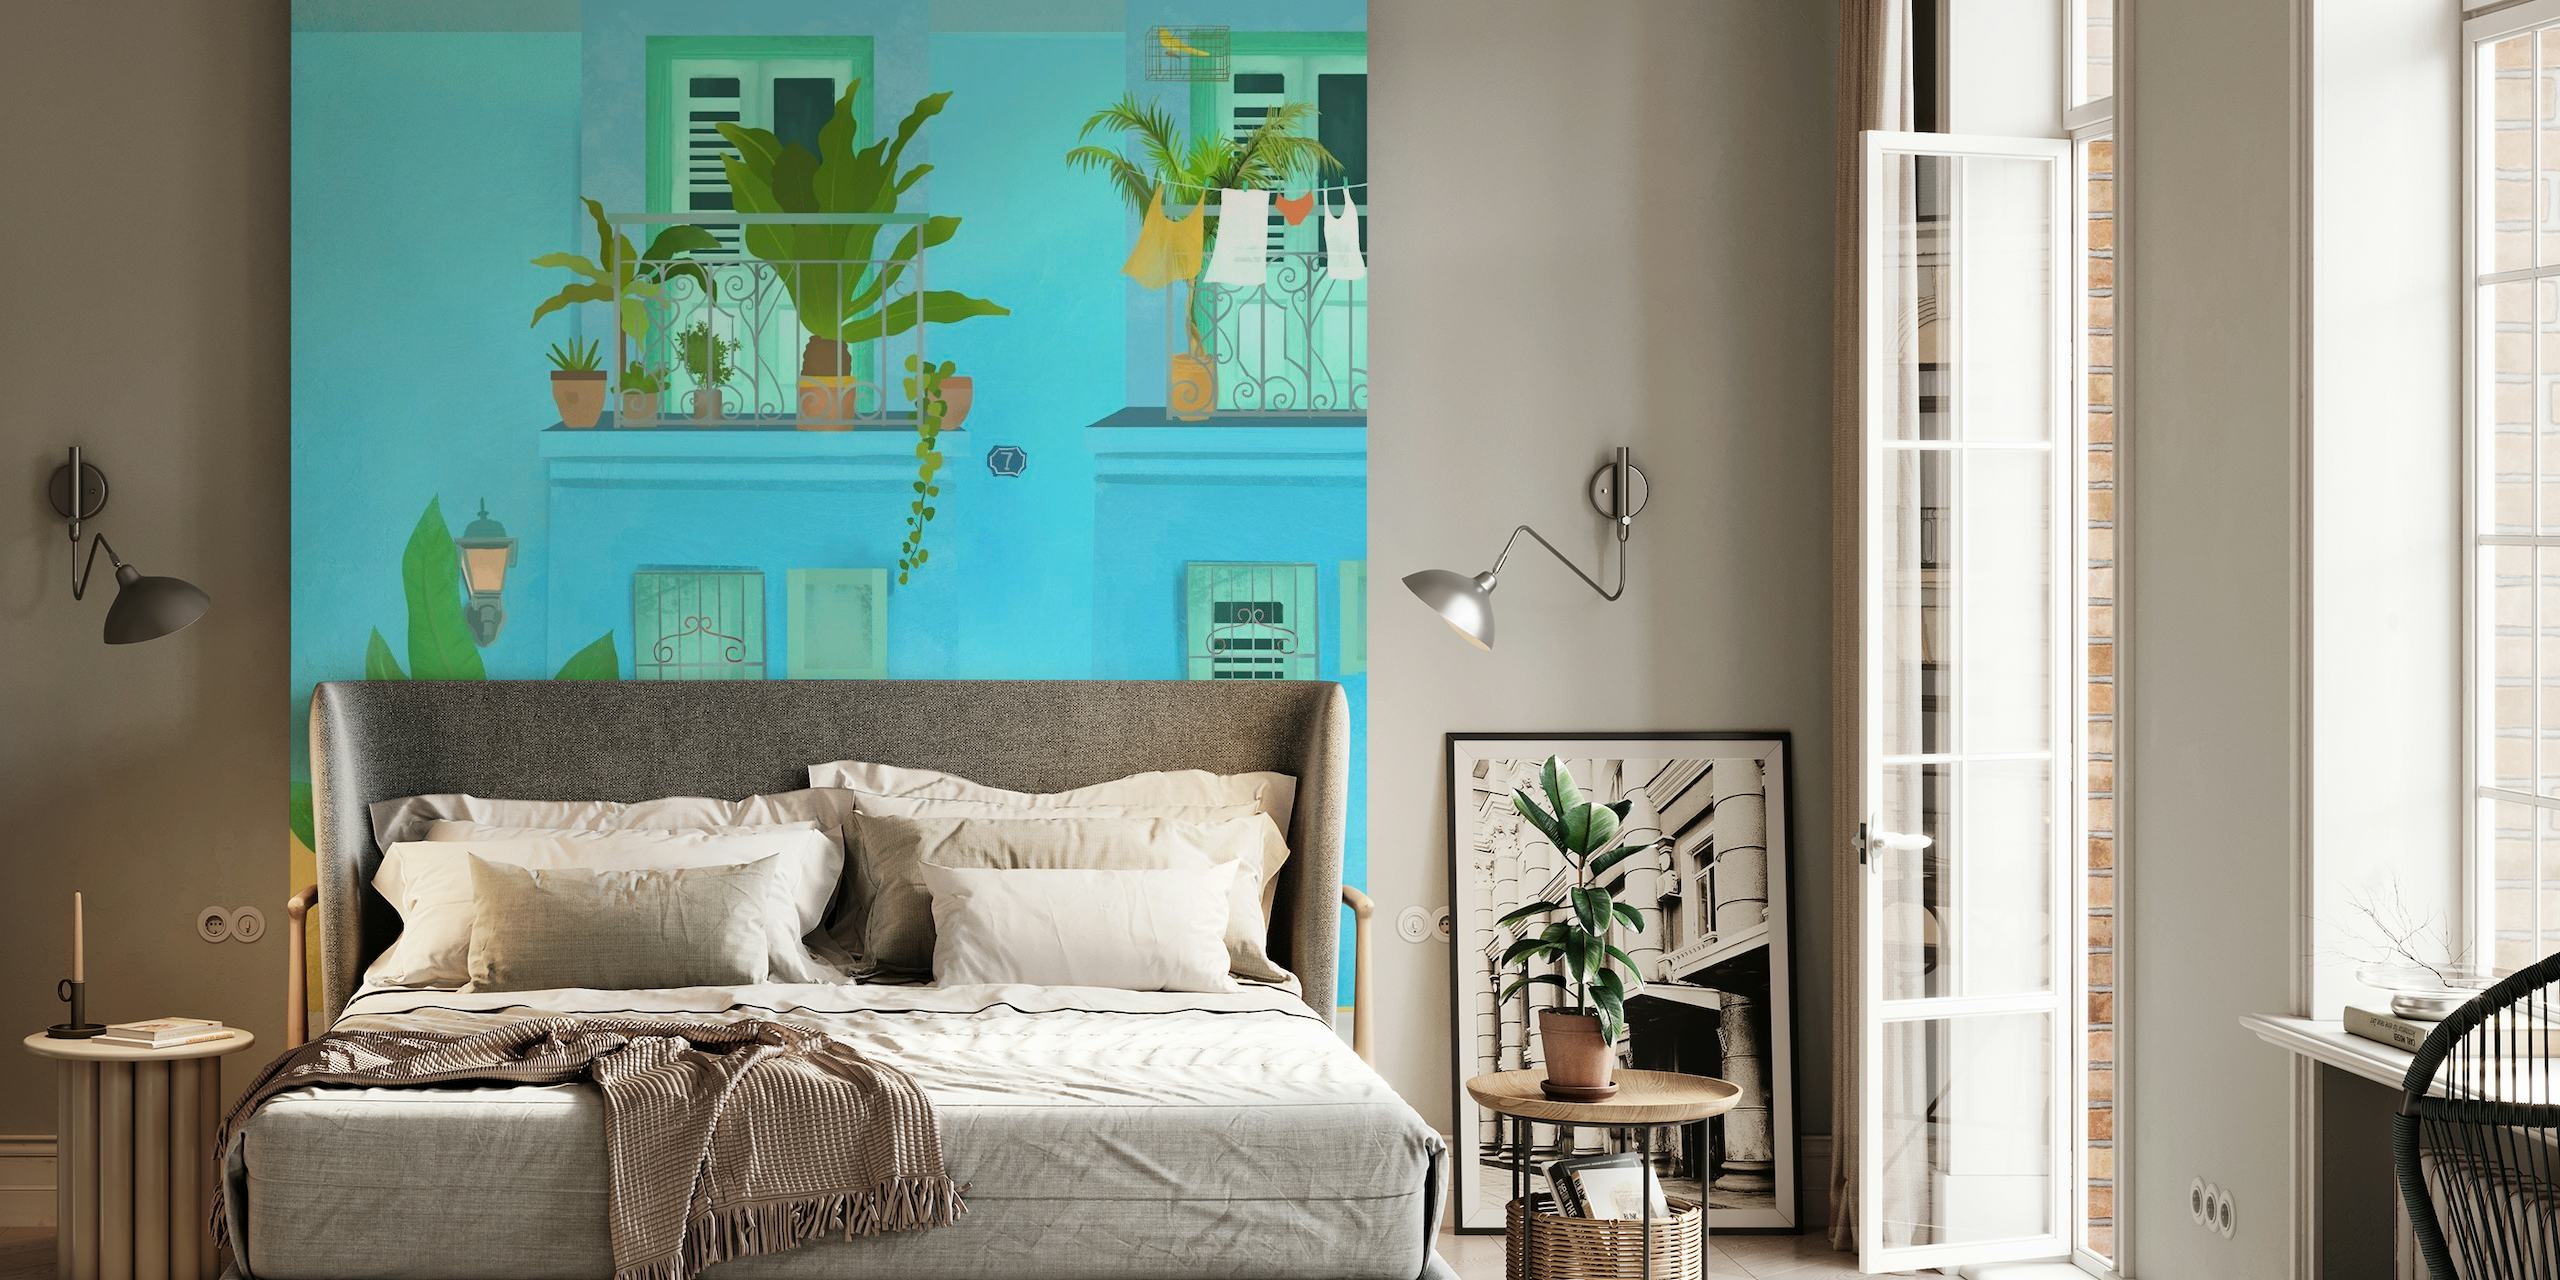 Cuban street scene wall mural with blue building, green plants, and a person sitting